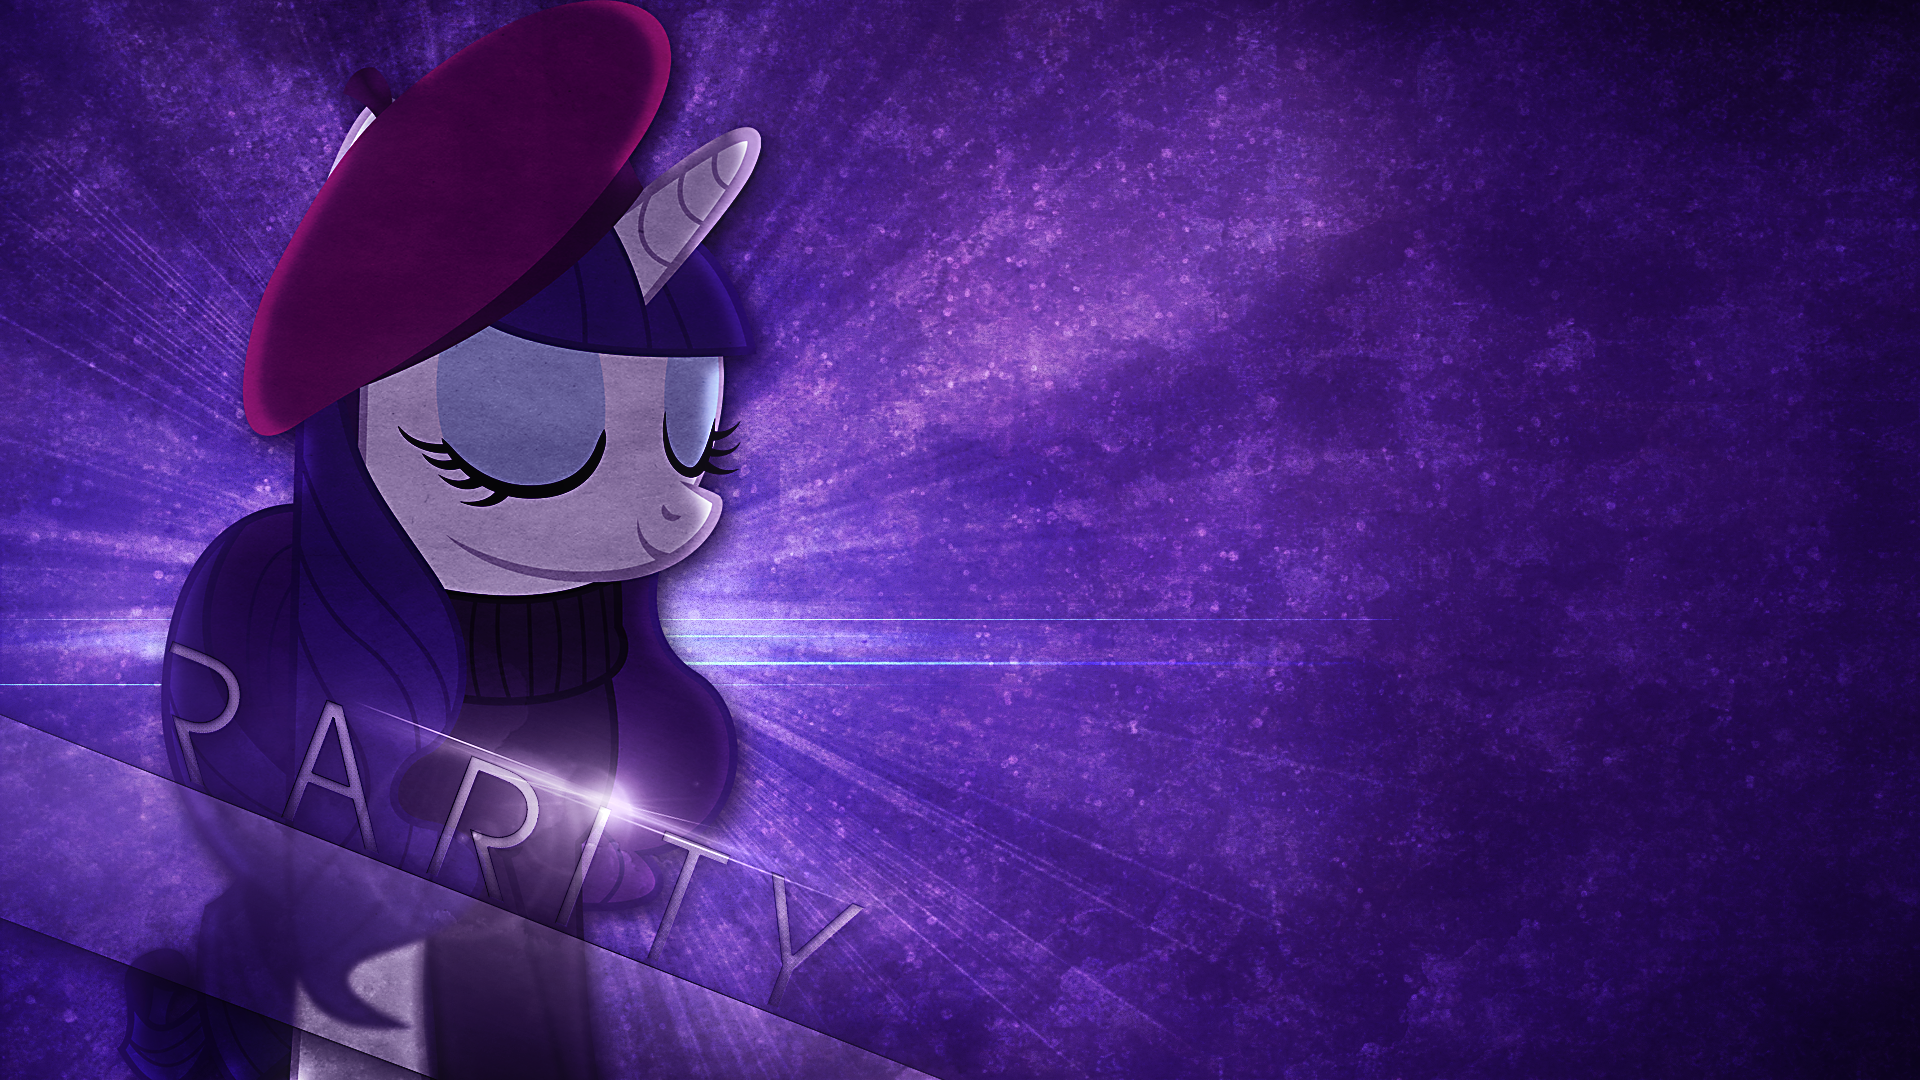 Artsy Rarity Wallpaper by Quanno3 and Tzolkine